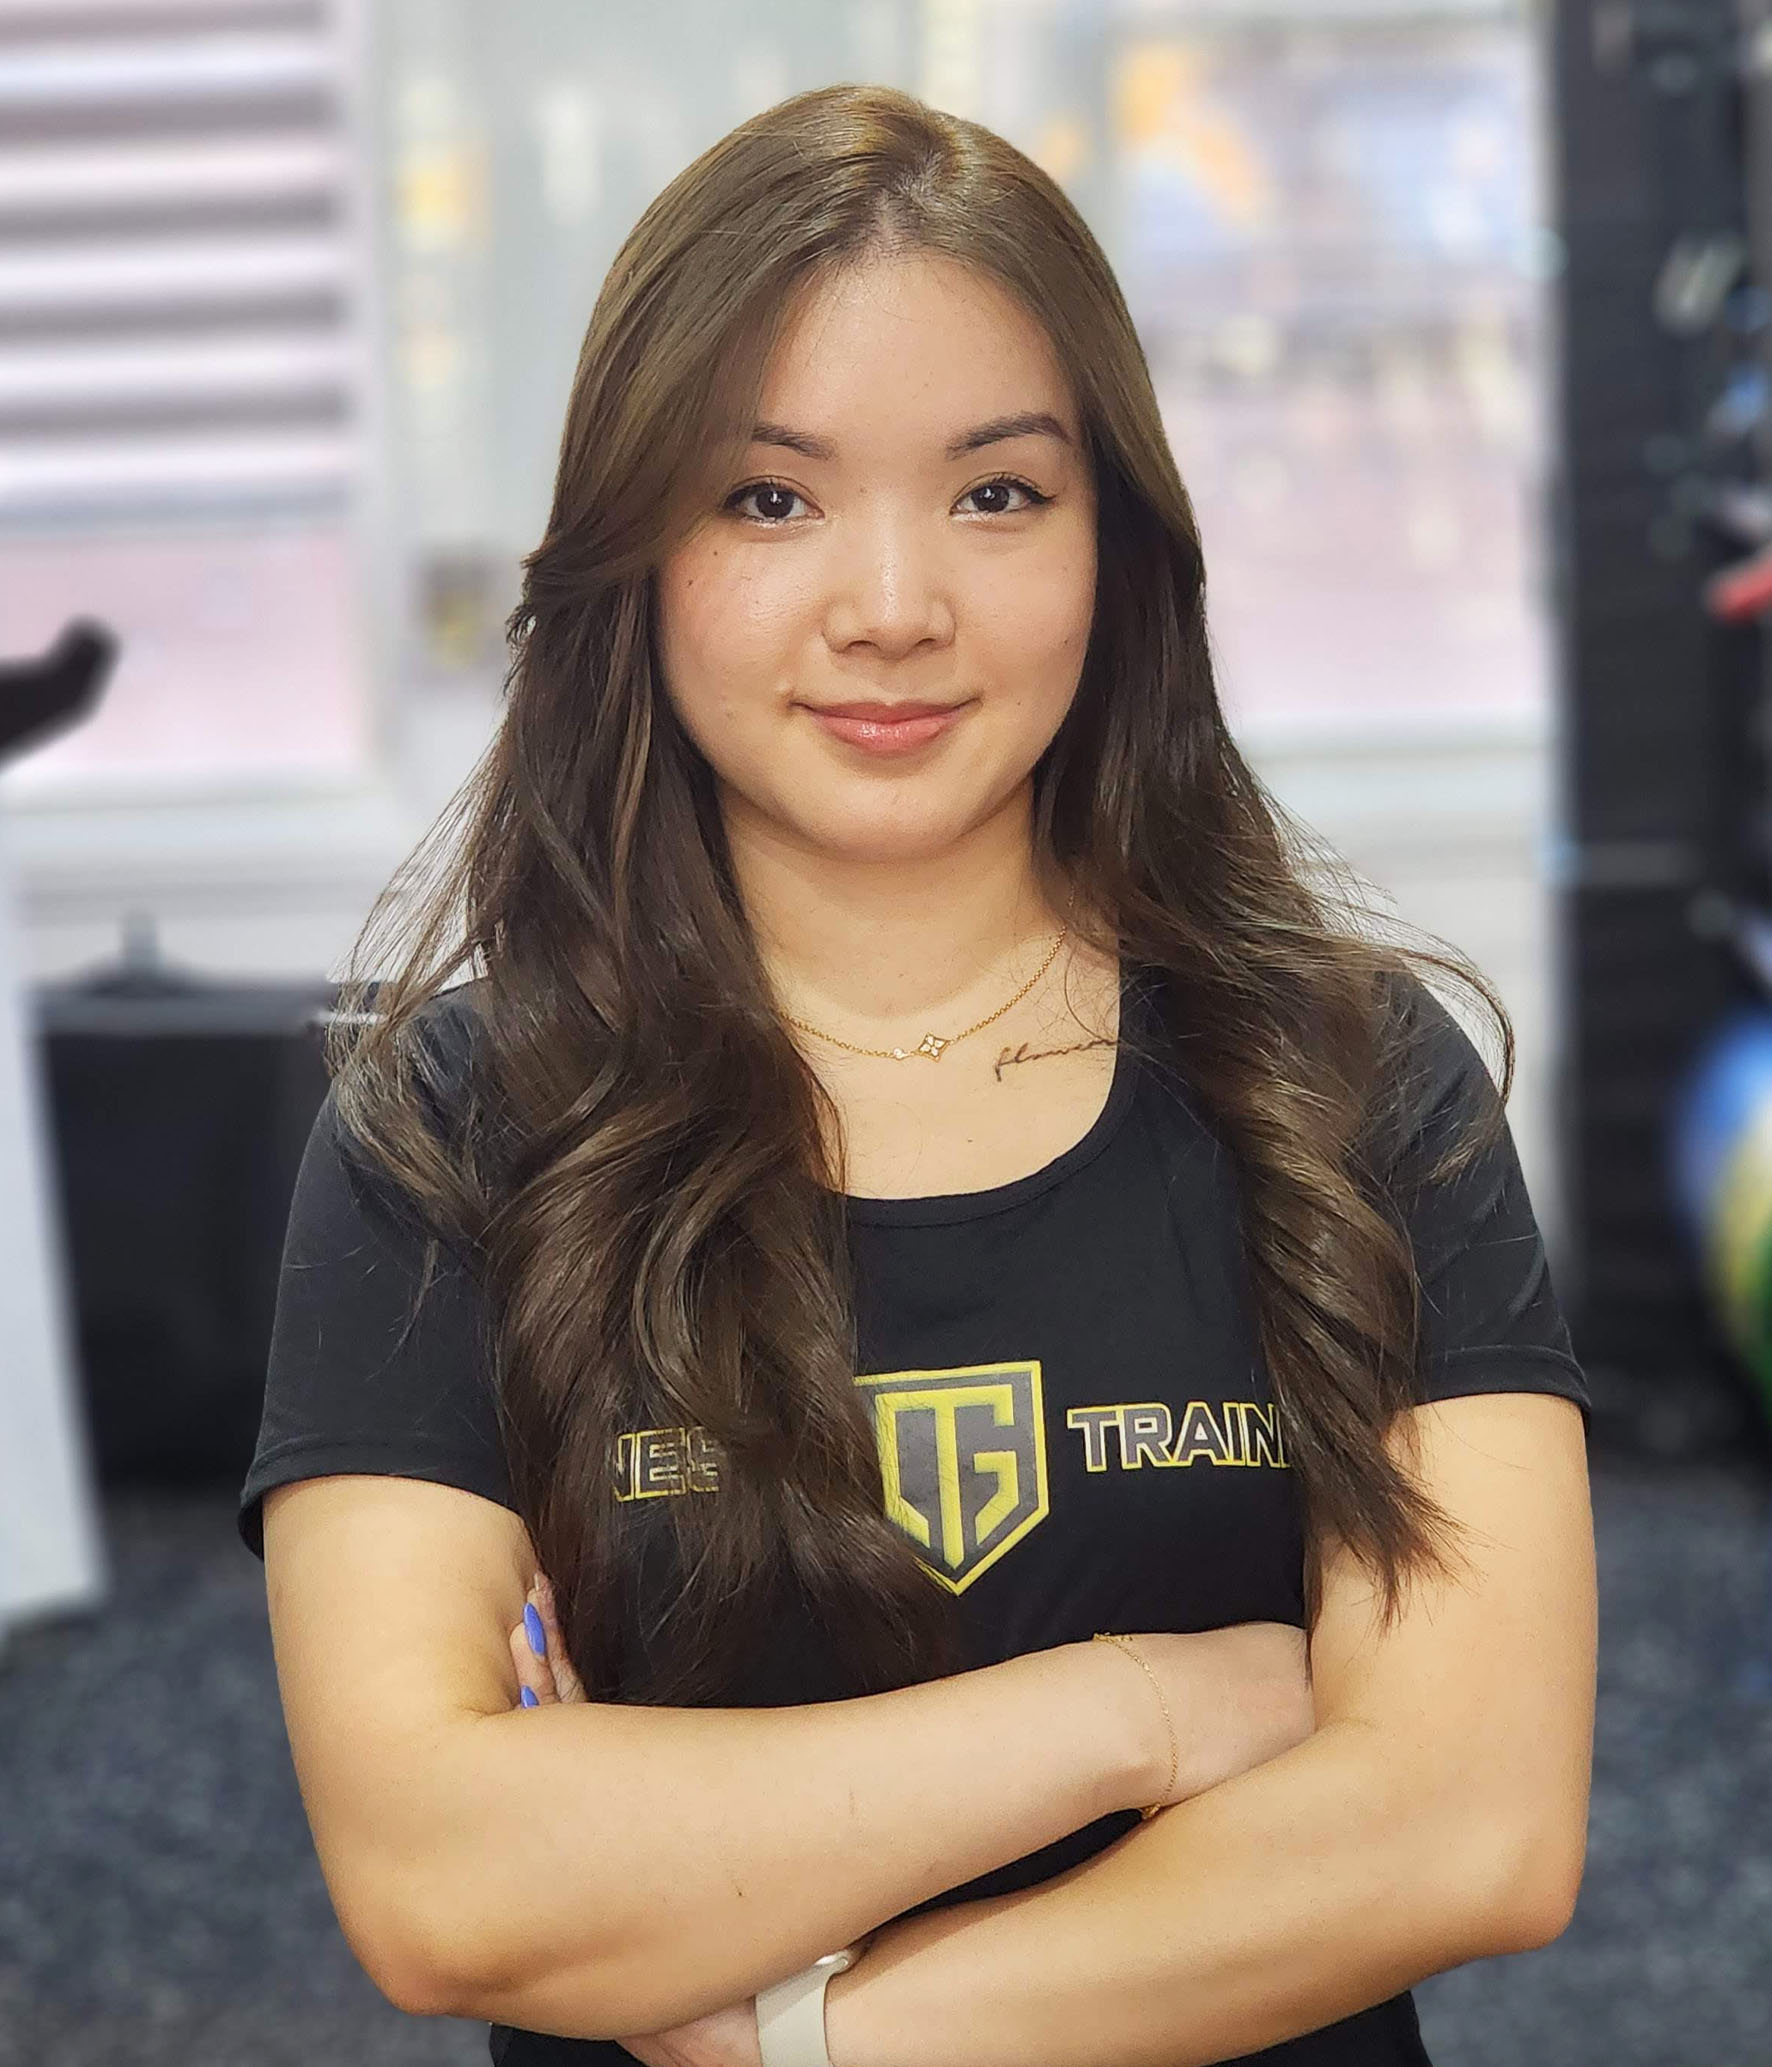 Betty, head Physical Therapist at Genesis Training, has her Doctorate of Physical Therapy from Stony Brook University. In addition to having her DPT, Betty also specializes in kickboxing and is a certified strength and conditioning coach.